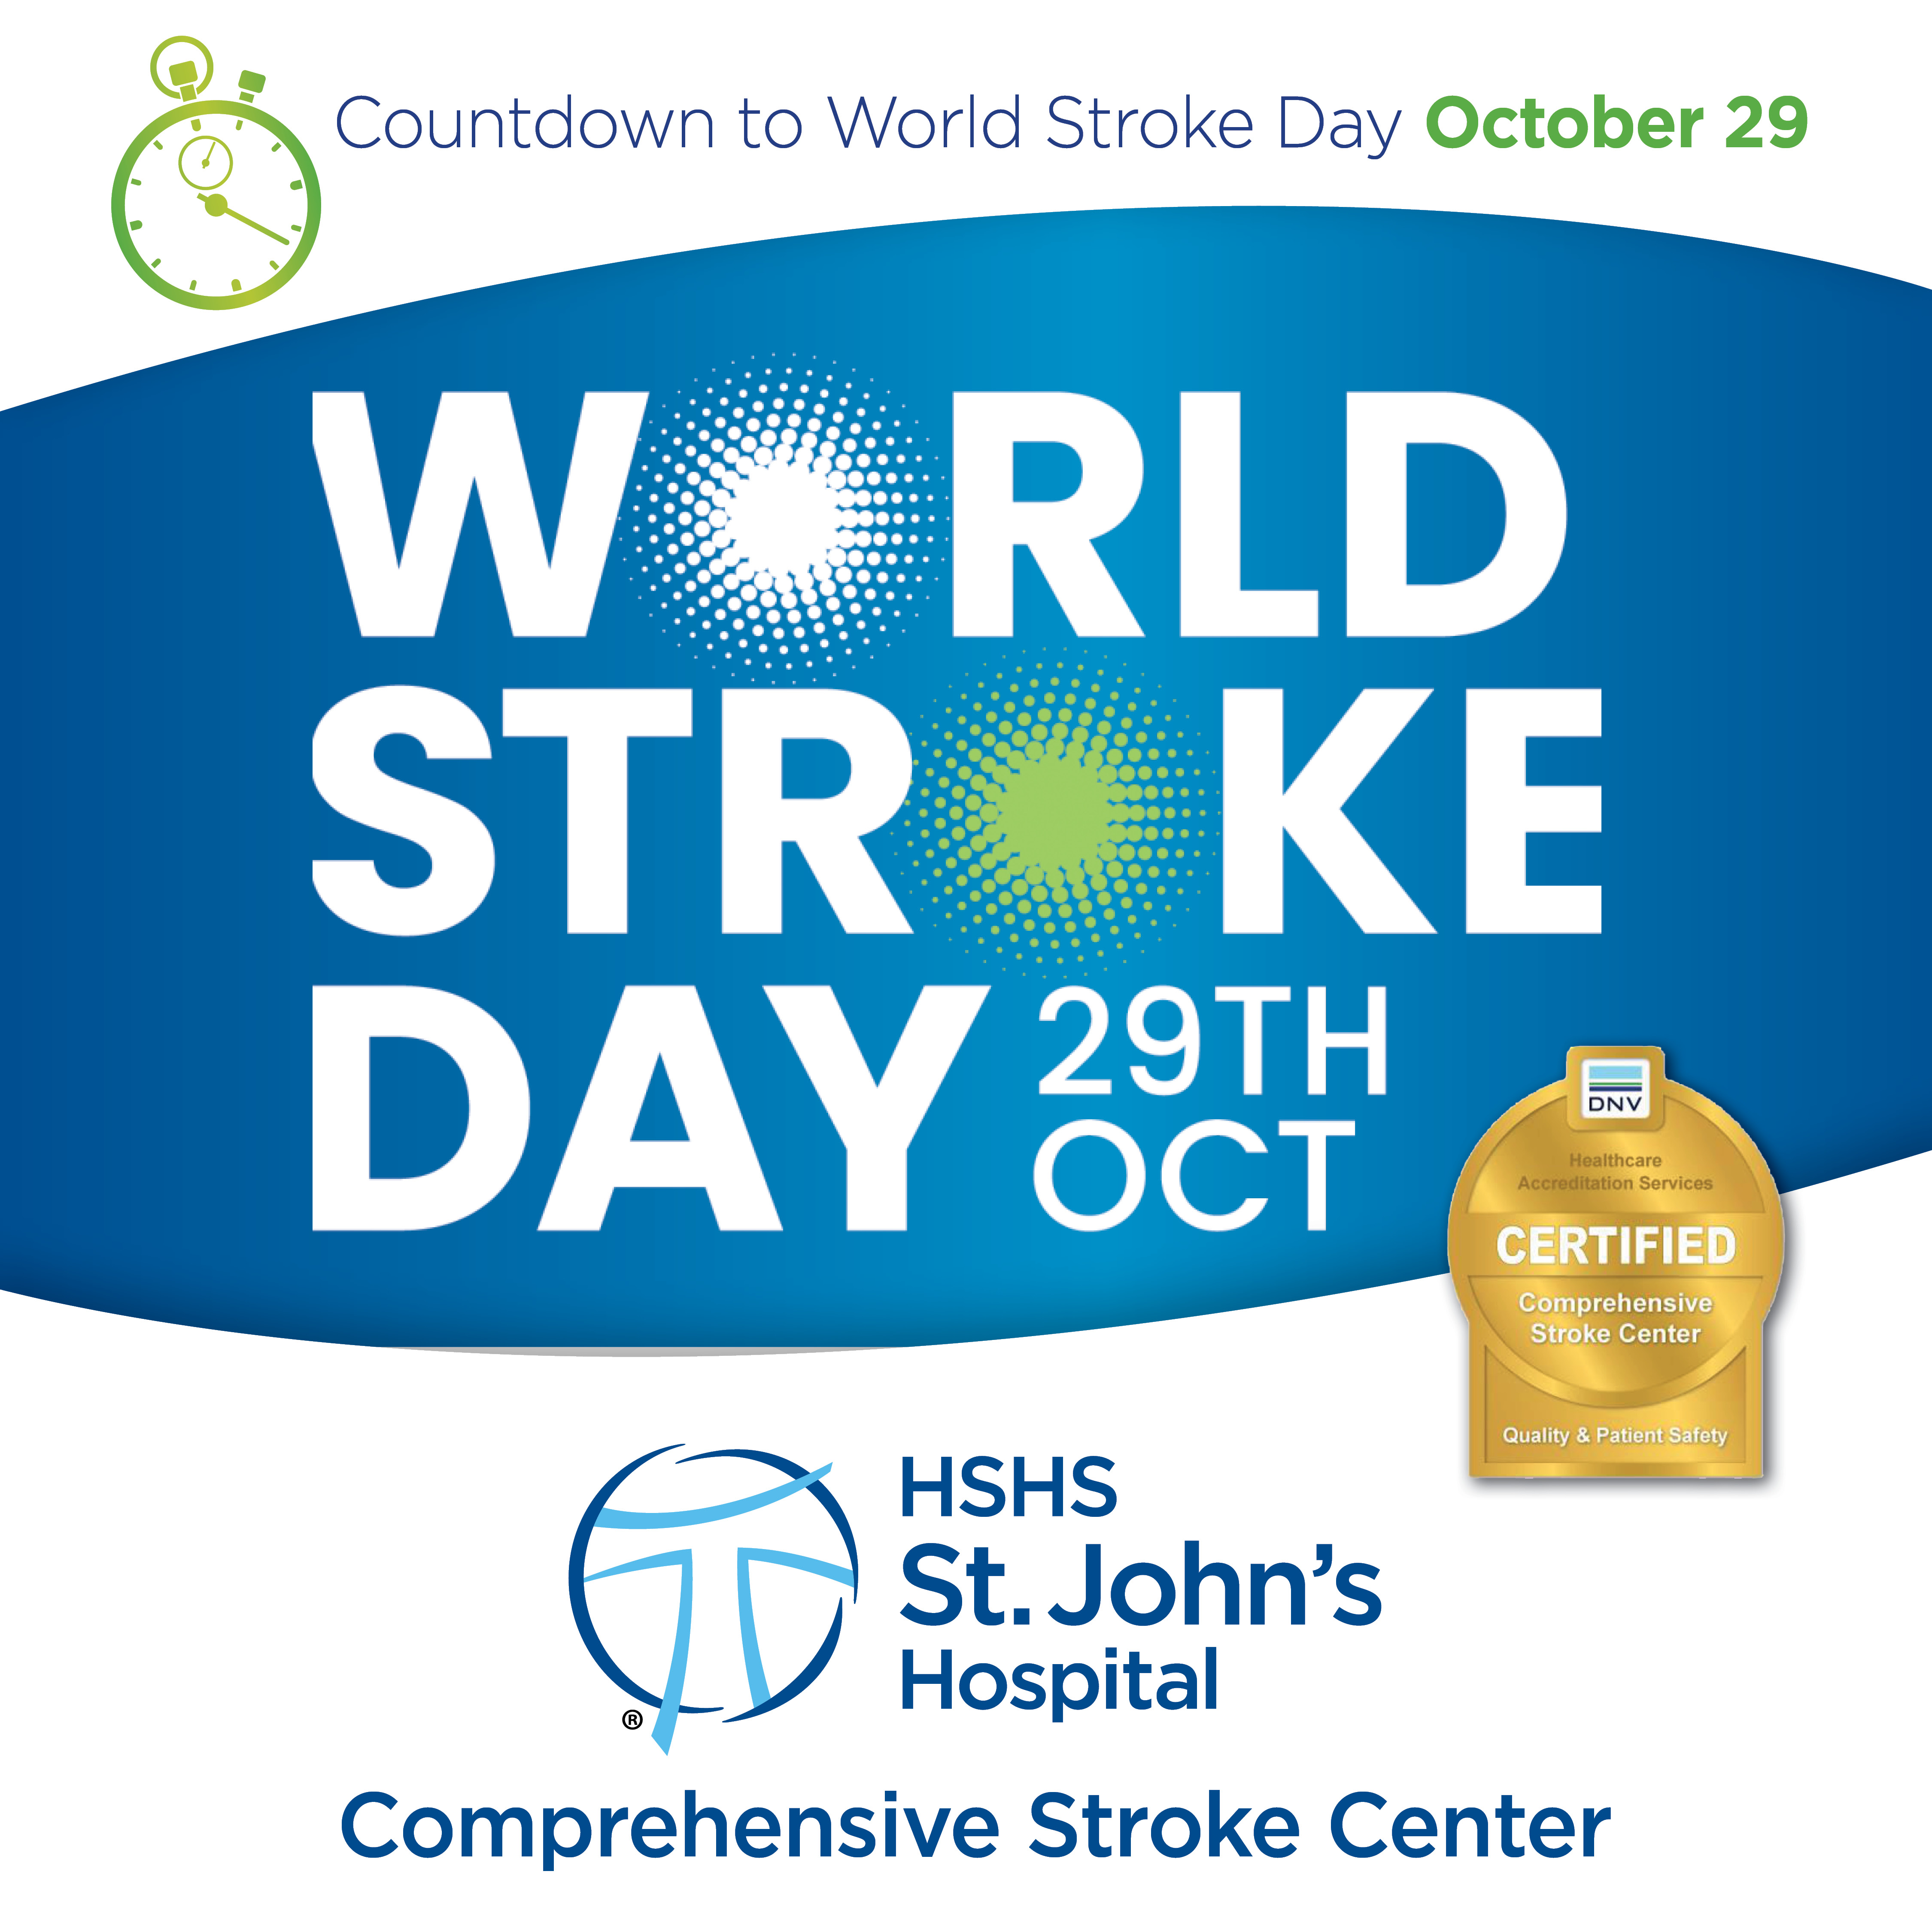 World Stroke Day is October 29.